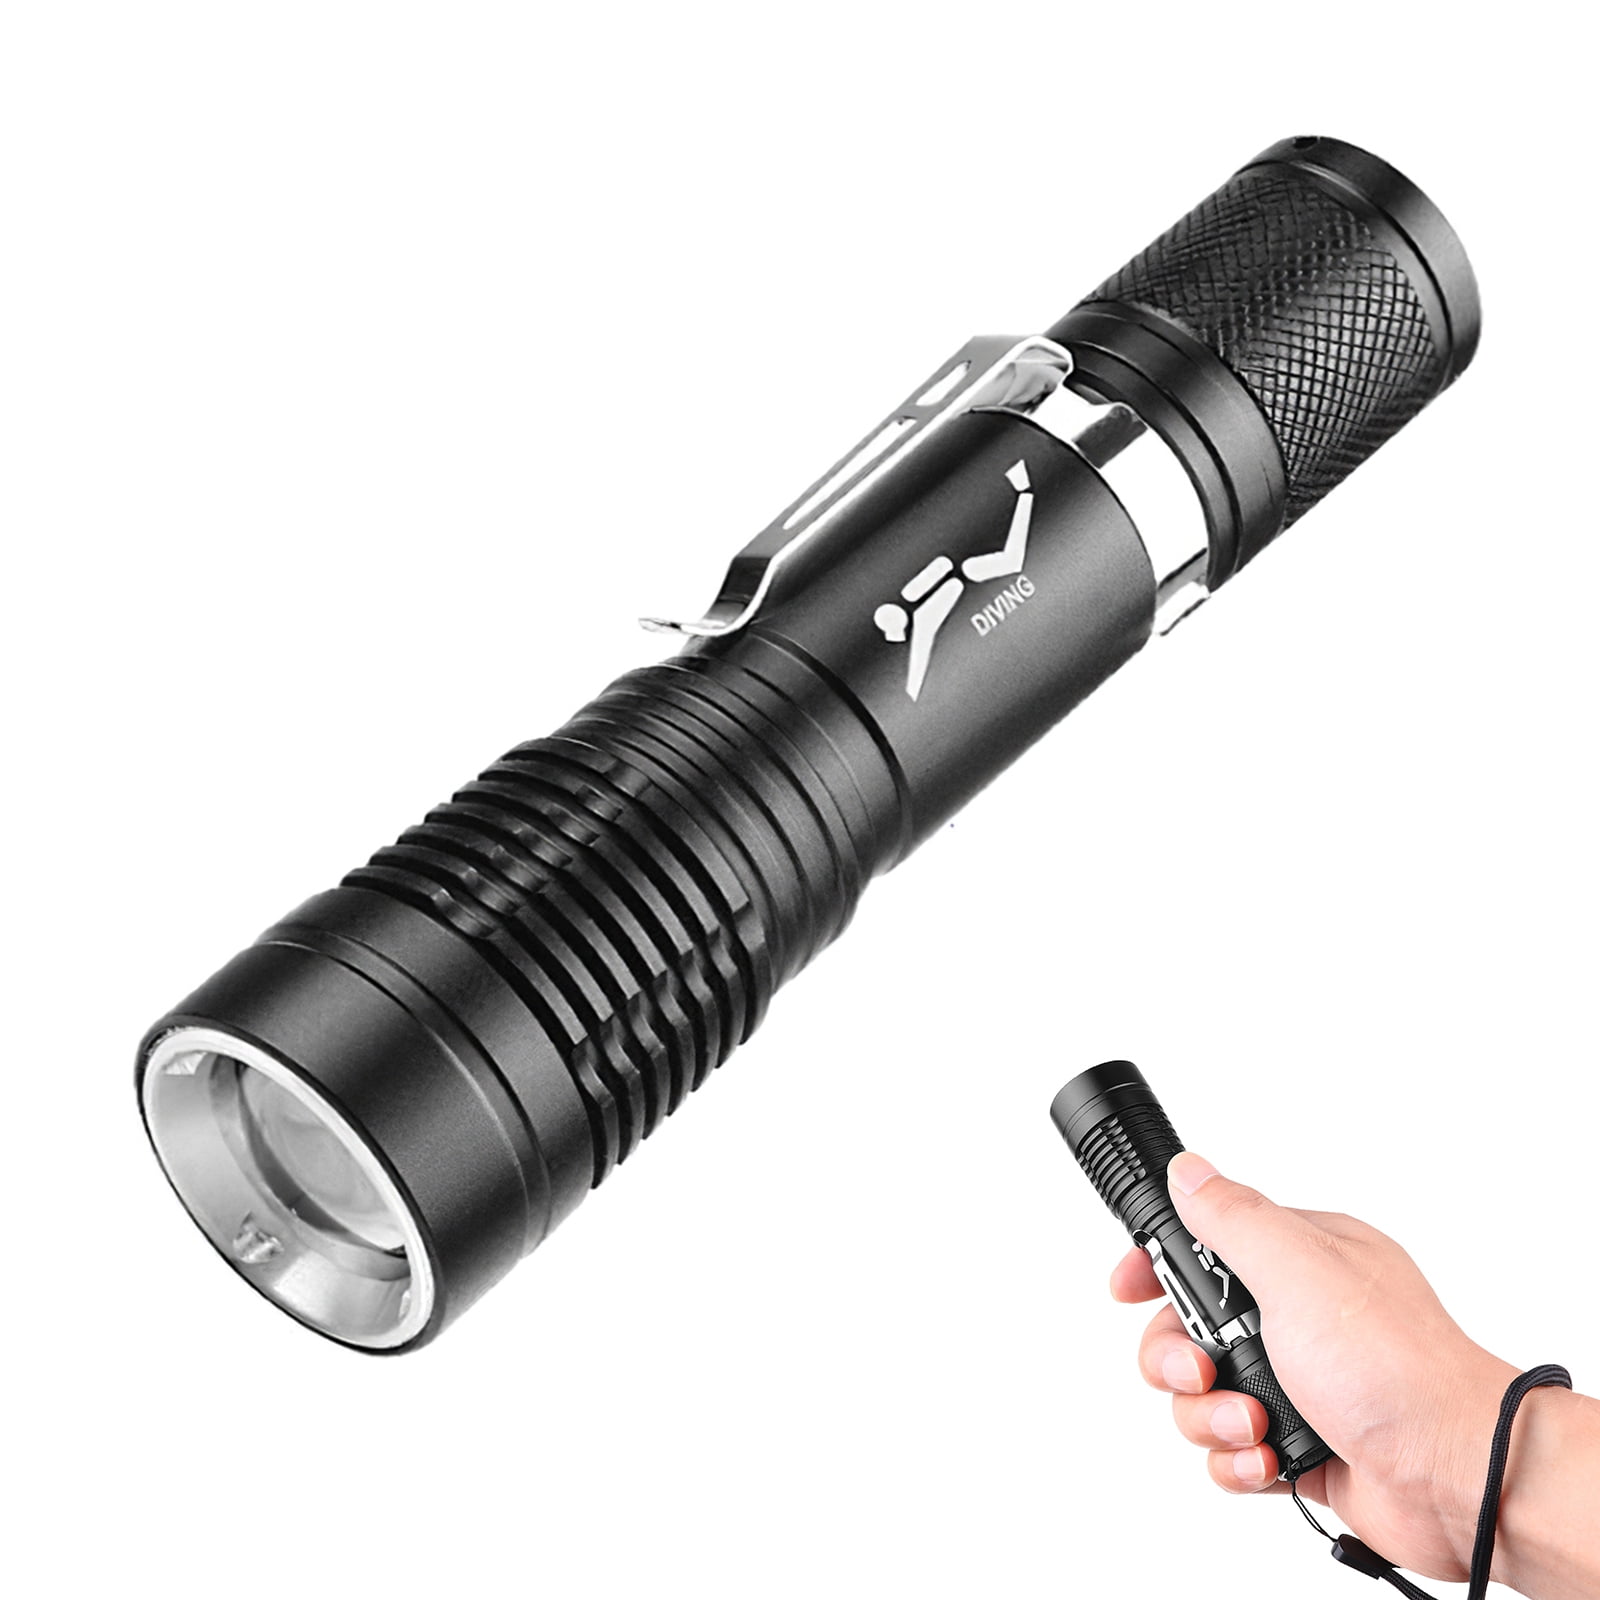 Super Bright 1W LED Zoom Function Torch Pocket Size Car Camping Hiking Outdoor 